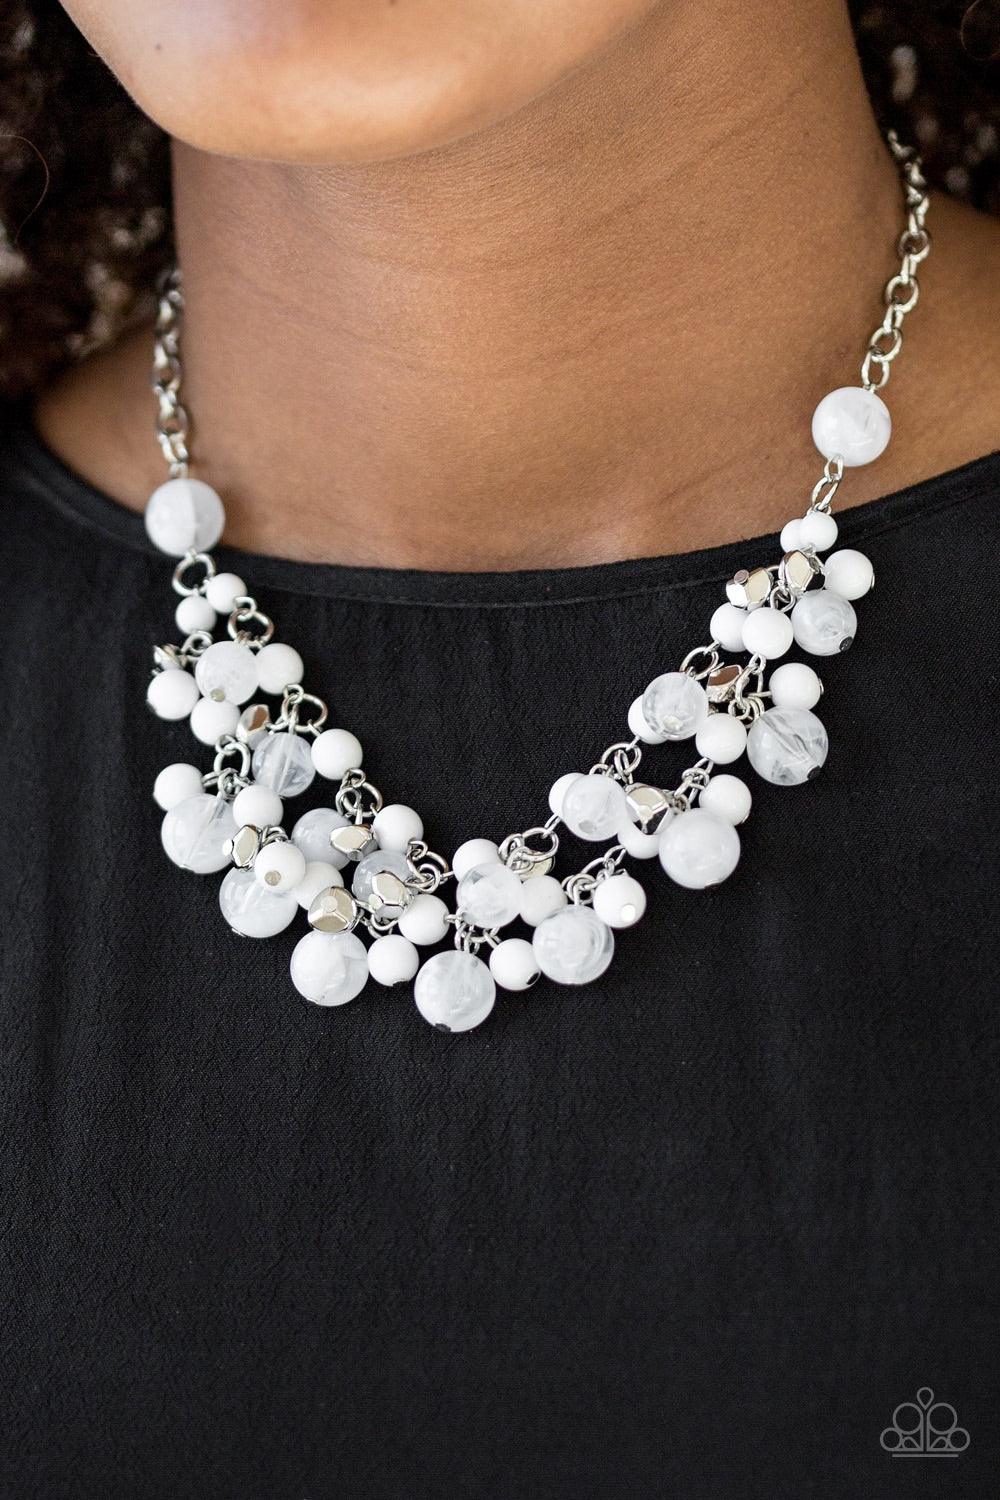 Paparazzi Accessories Gone Sailing - White Featuring polished and cloudy finishes, refreshing white beads drip from the bottom of two shimmery silver chains below the collar. Faceted silver beads trickle between the colorful accents, adding a splash of me